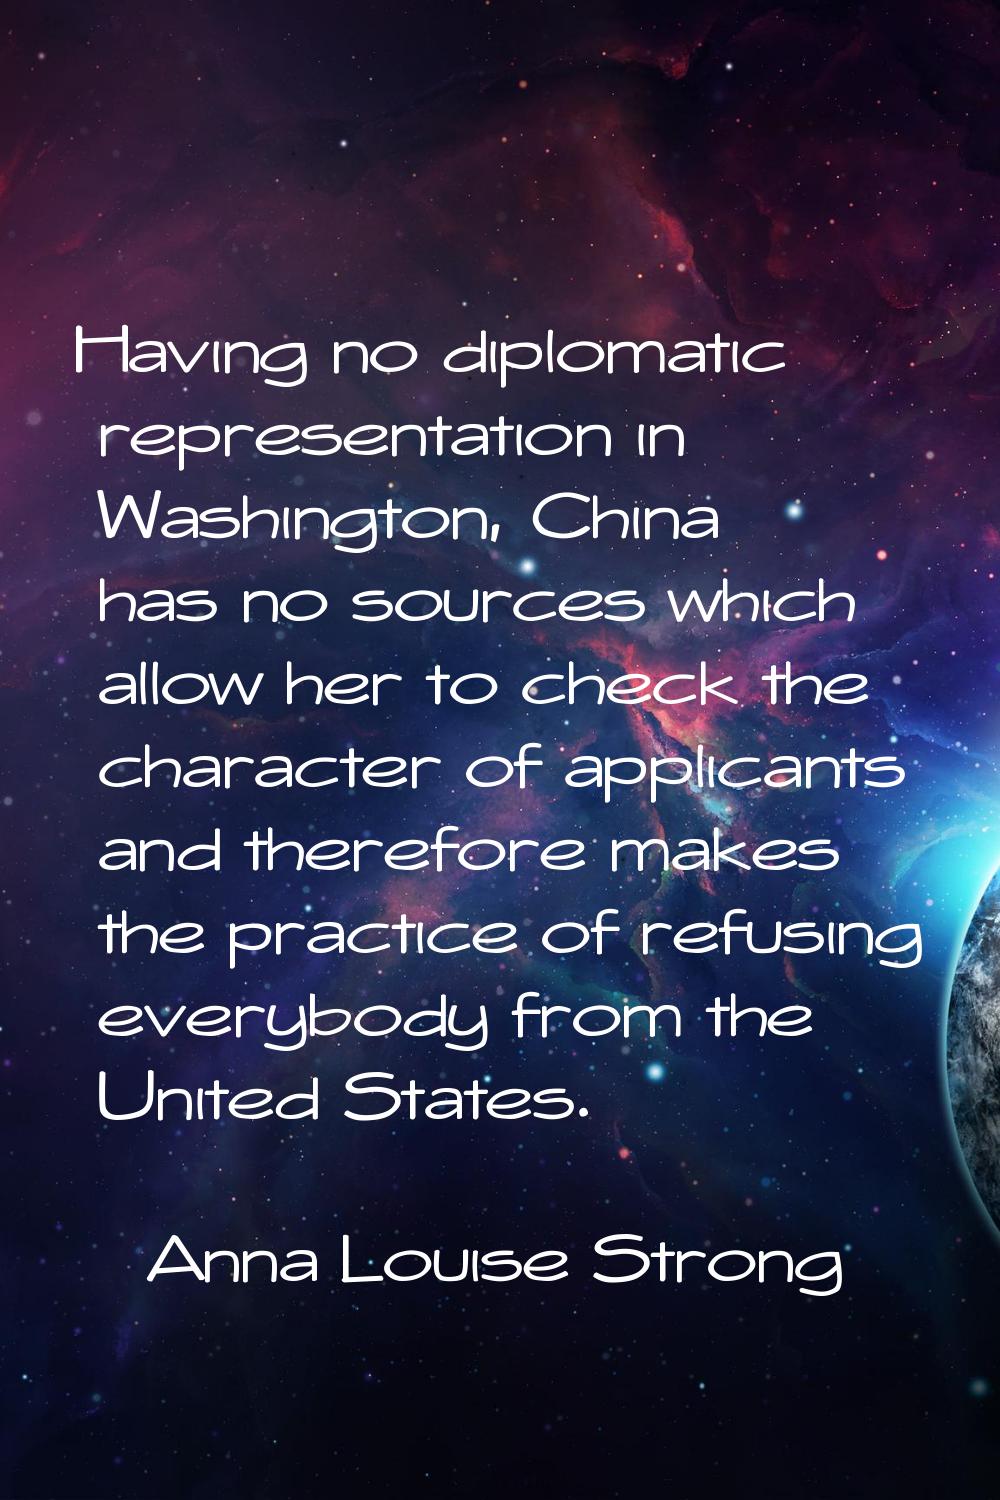 Having no diplomatic representation in Washington, China has no sources which allow her to check th